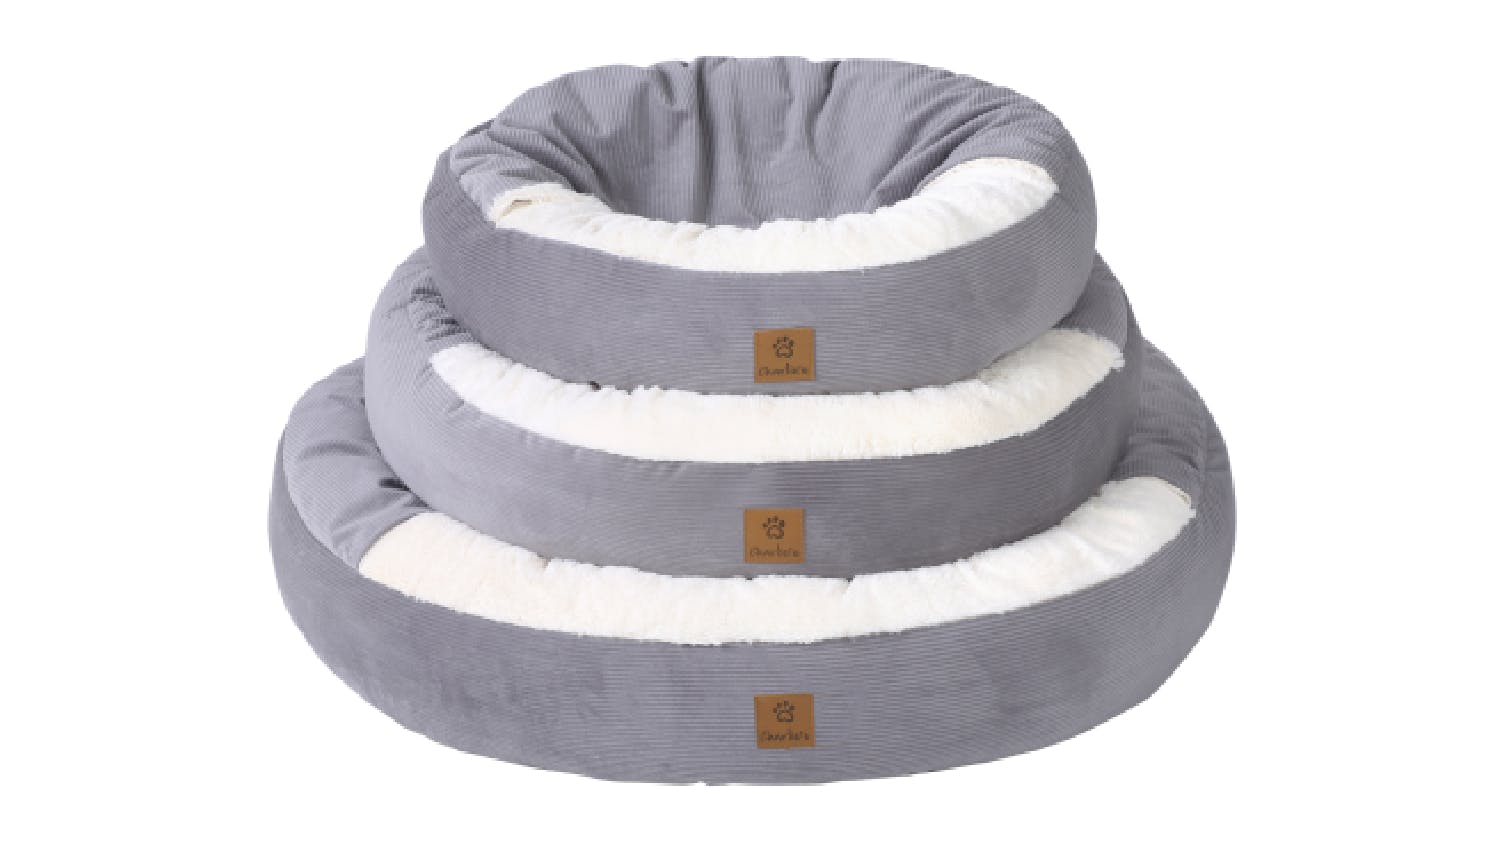 Charlie's "Snookie" Corduroy Pet Bed with Hood Large - Dove Grey